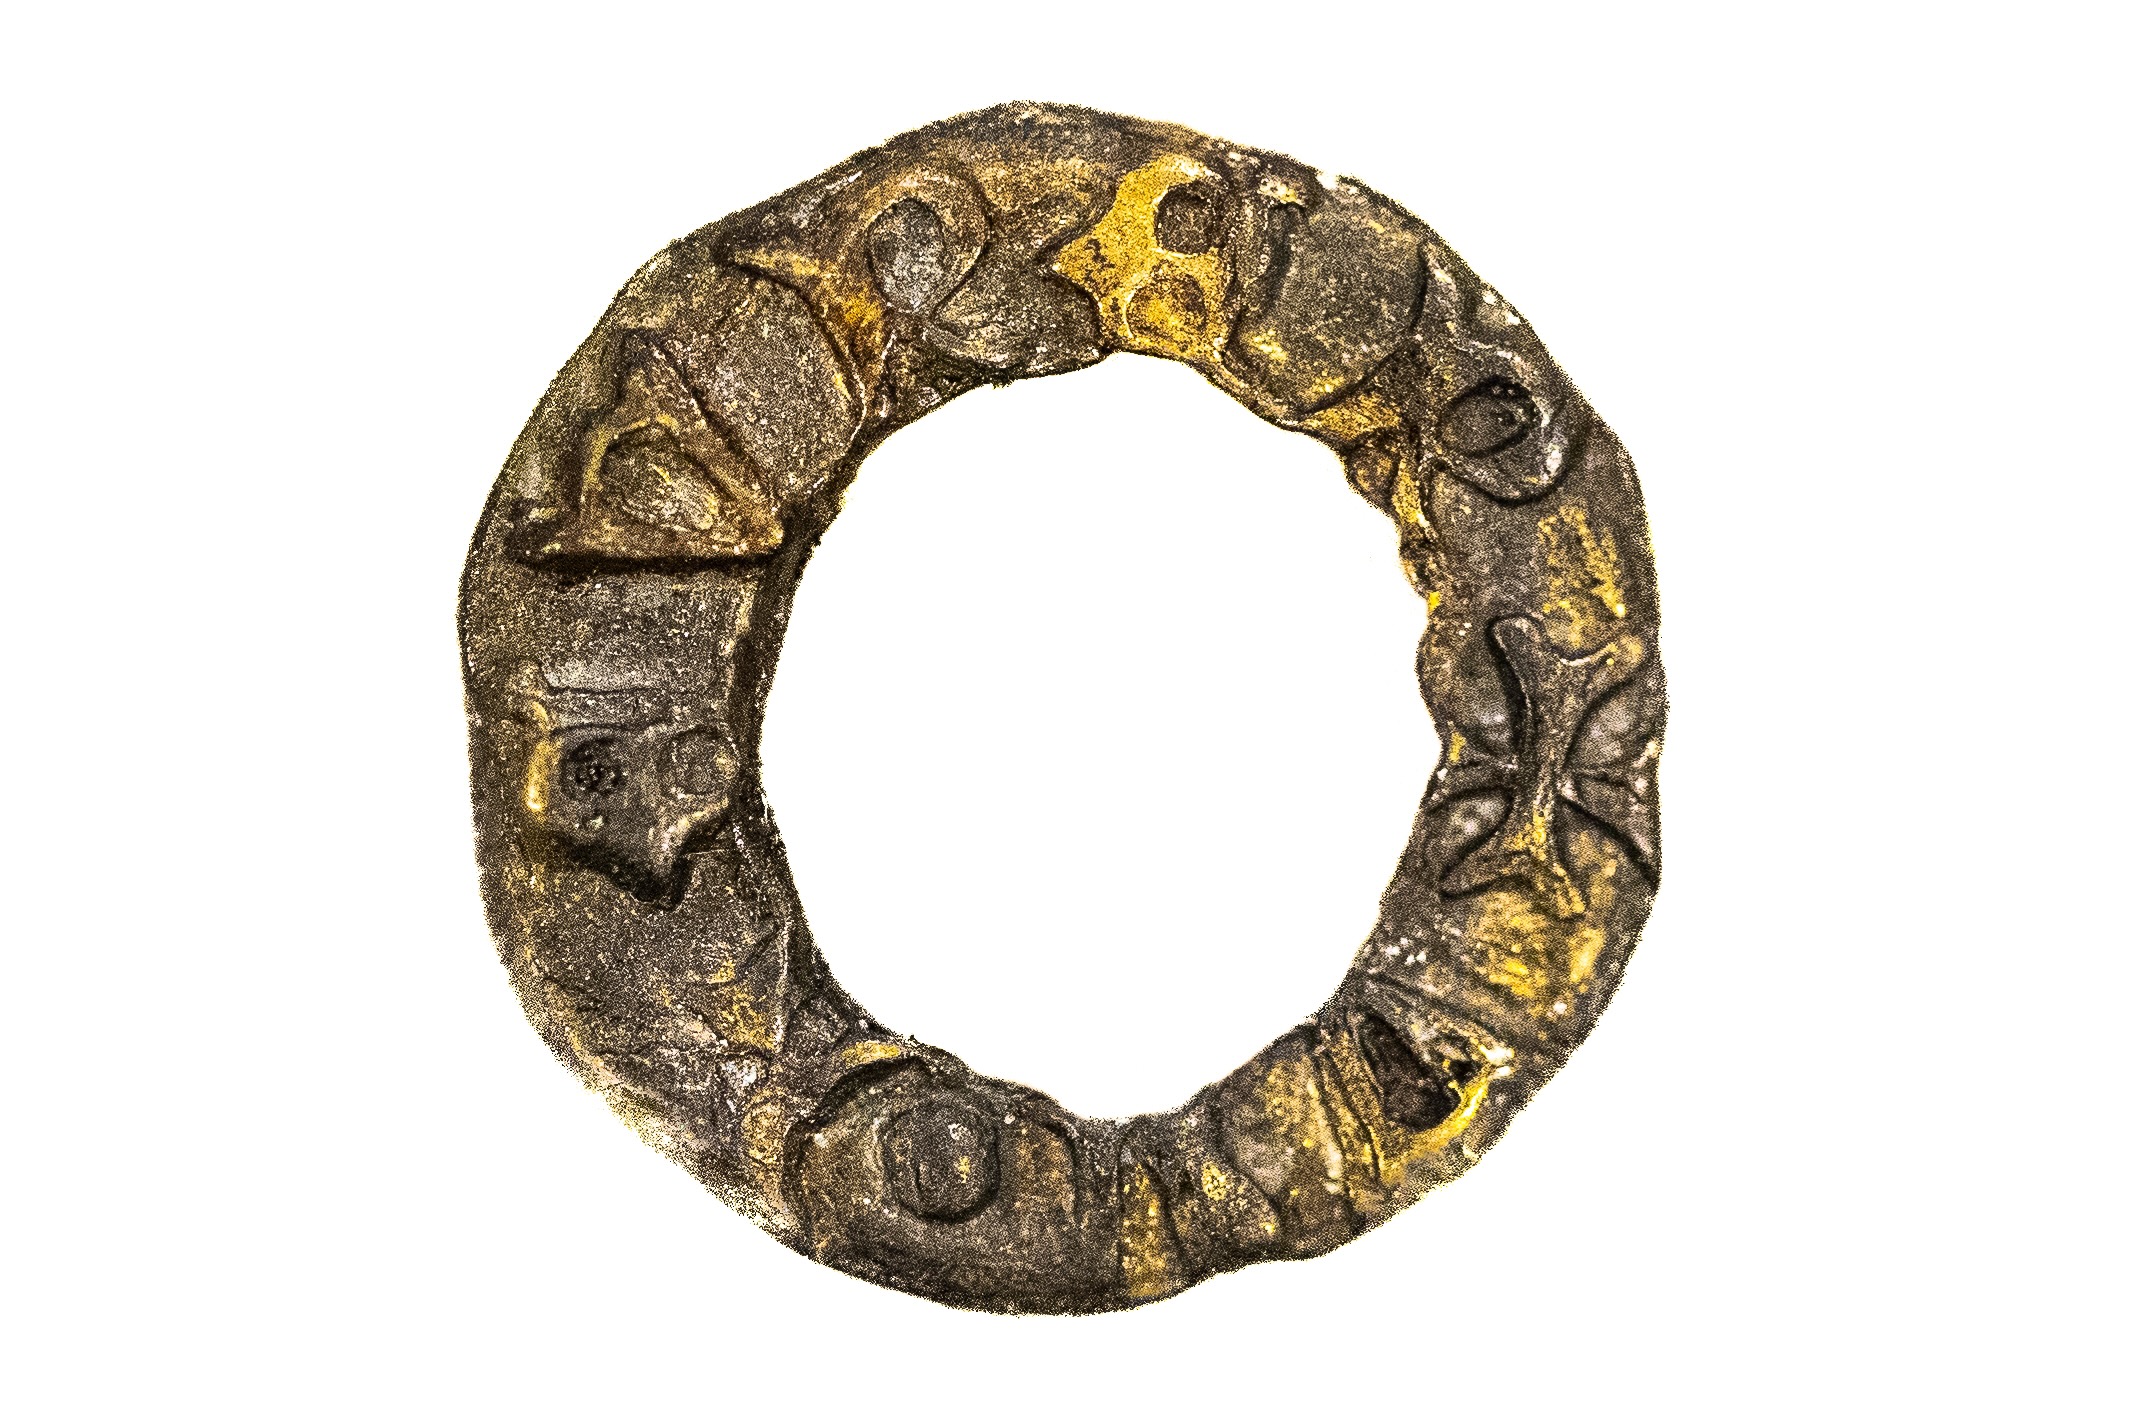 One of the chainmail rings had a "maker's mark" that showed it had been made in Nuremberg in 1416.